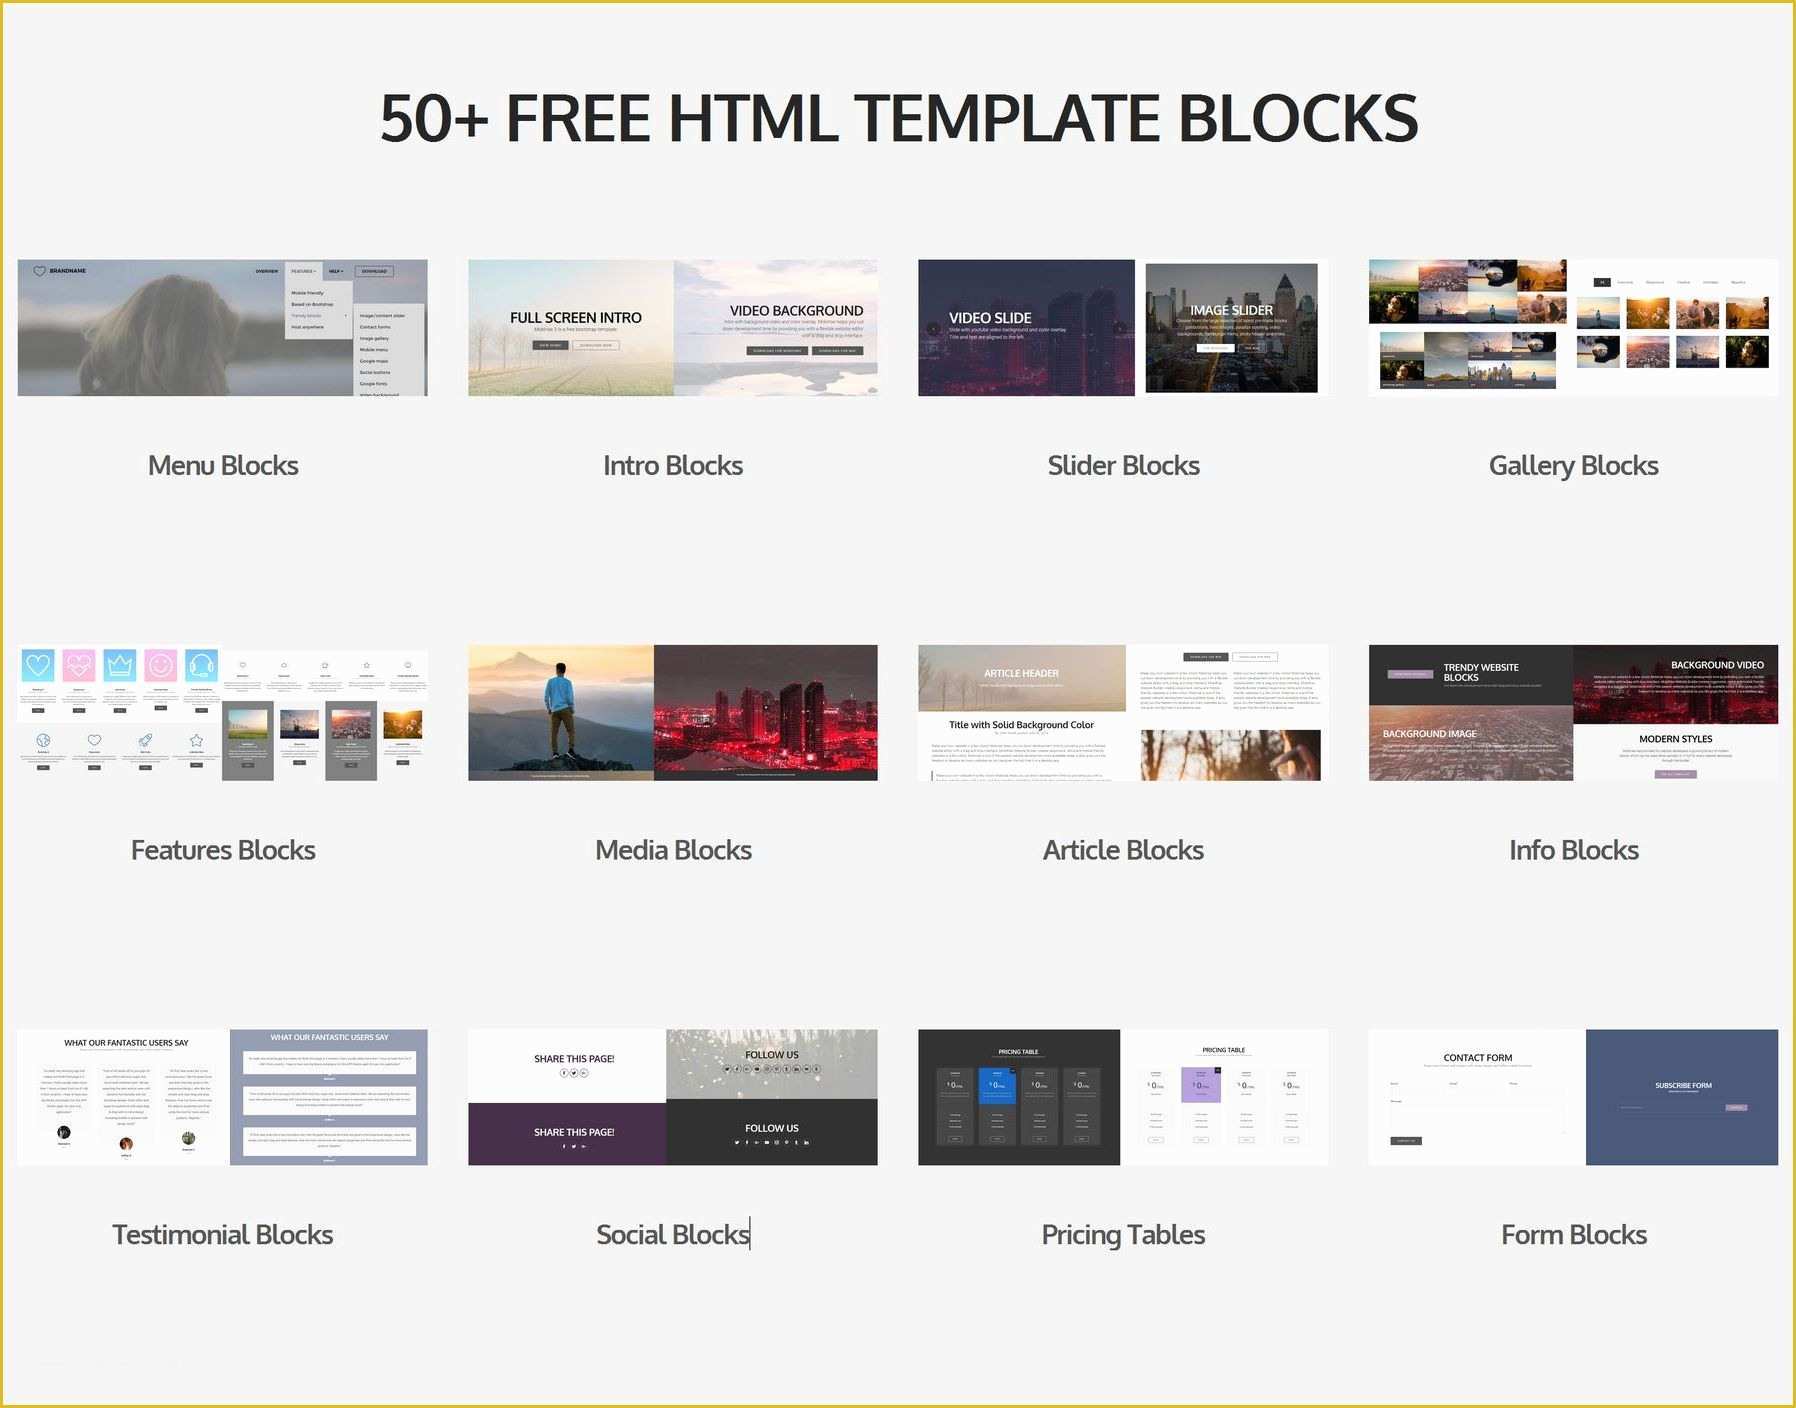 Best Free Ebay Templates 2017 Of Best Free HTML5 Video Background Bootstrap Templates Of 2019